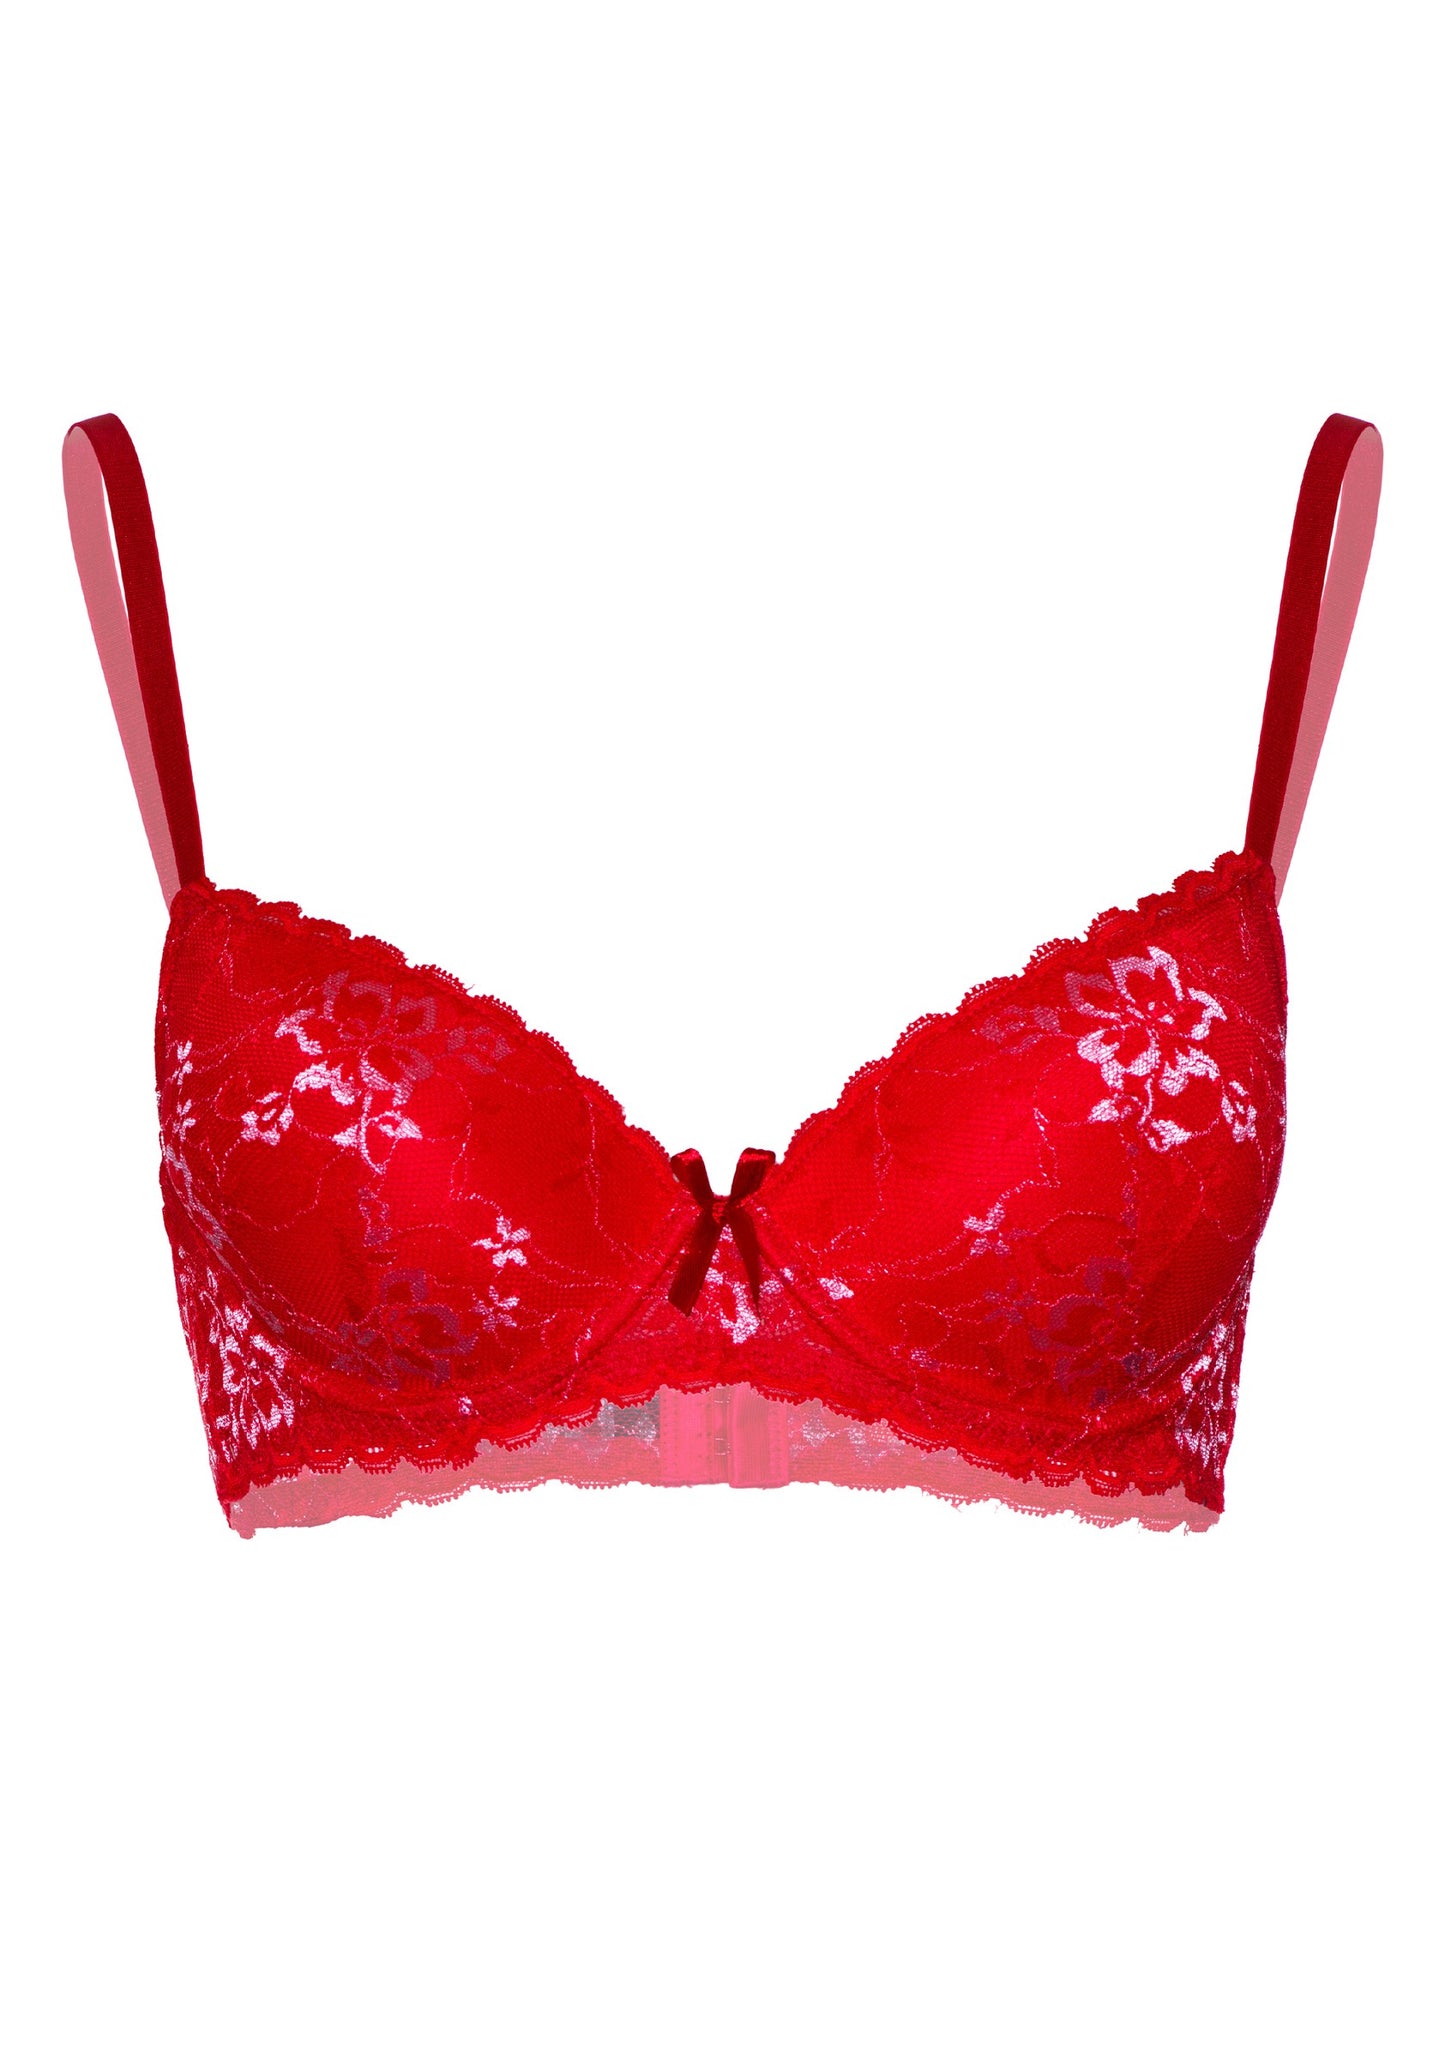 Daring Intimates Mix & Match Demi bra with floral lace RED 75B - 0